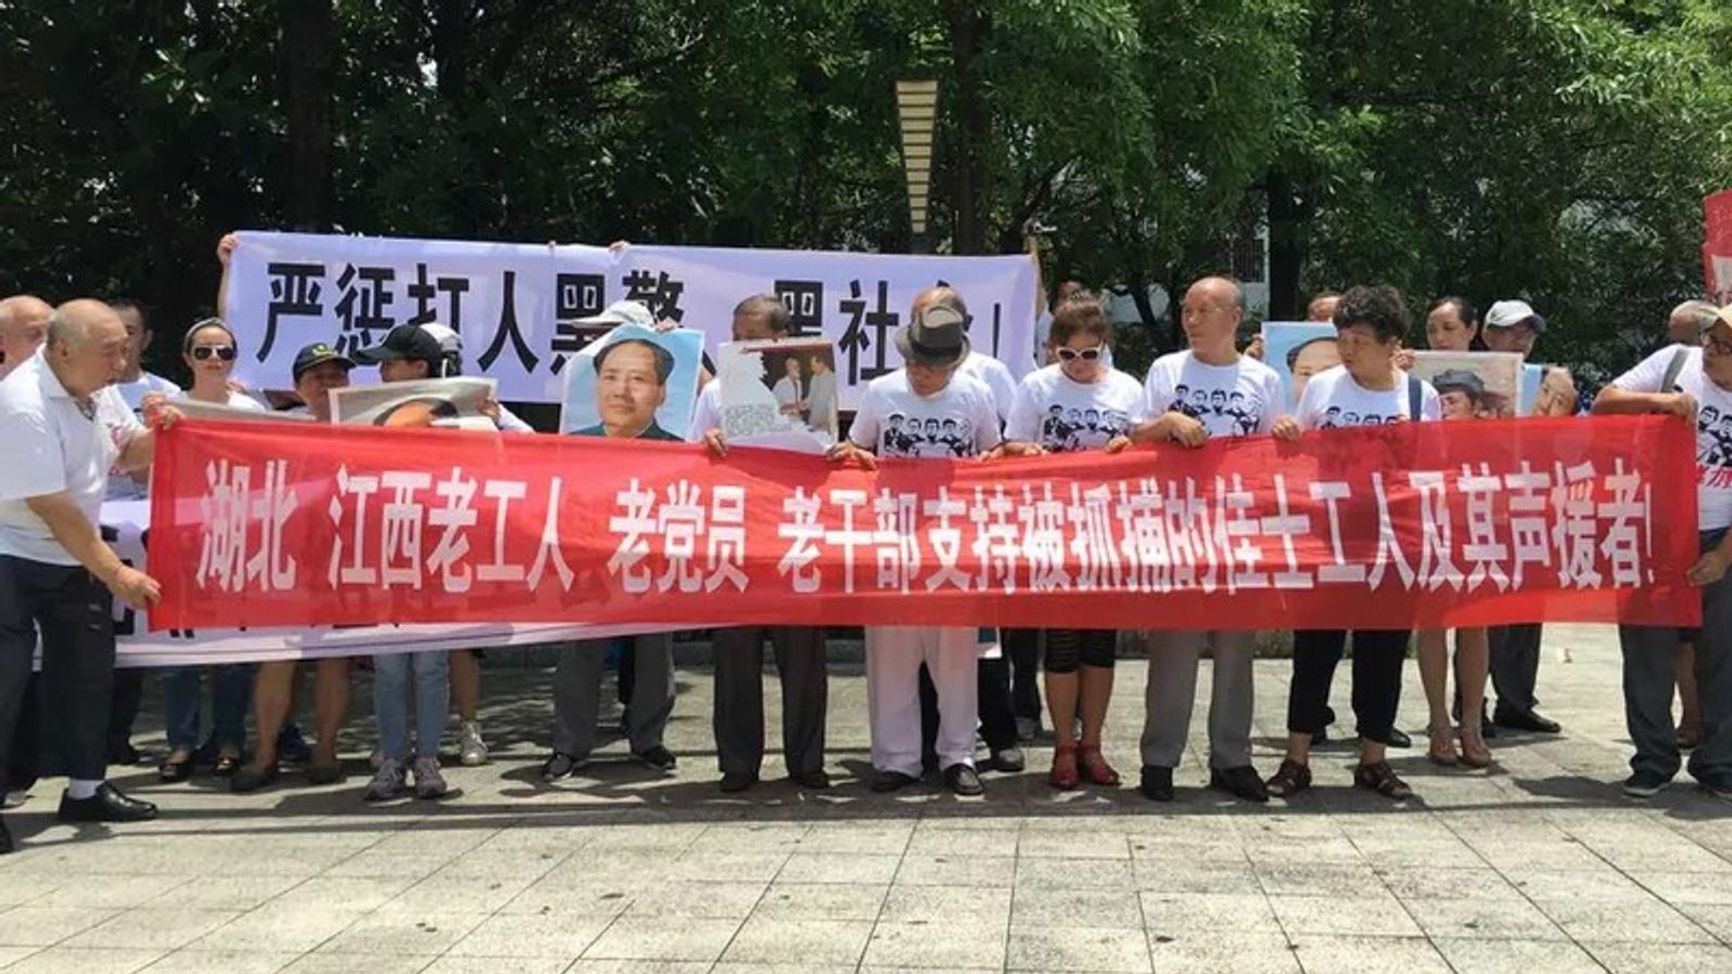 Protesters support striking Jasic factory workers outside a police station, China, August 6, 2018